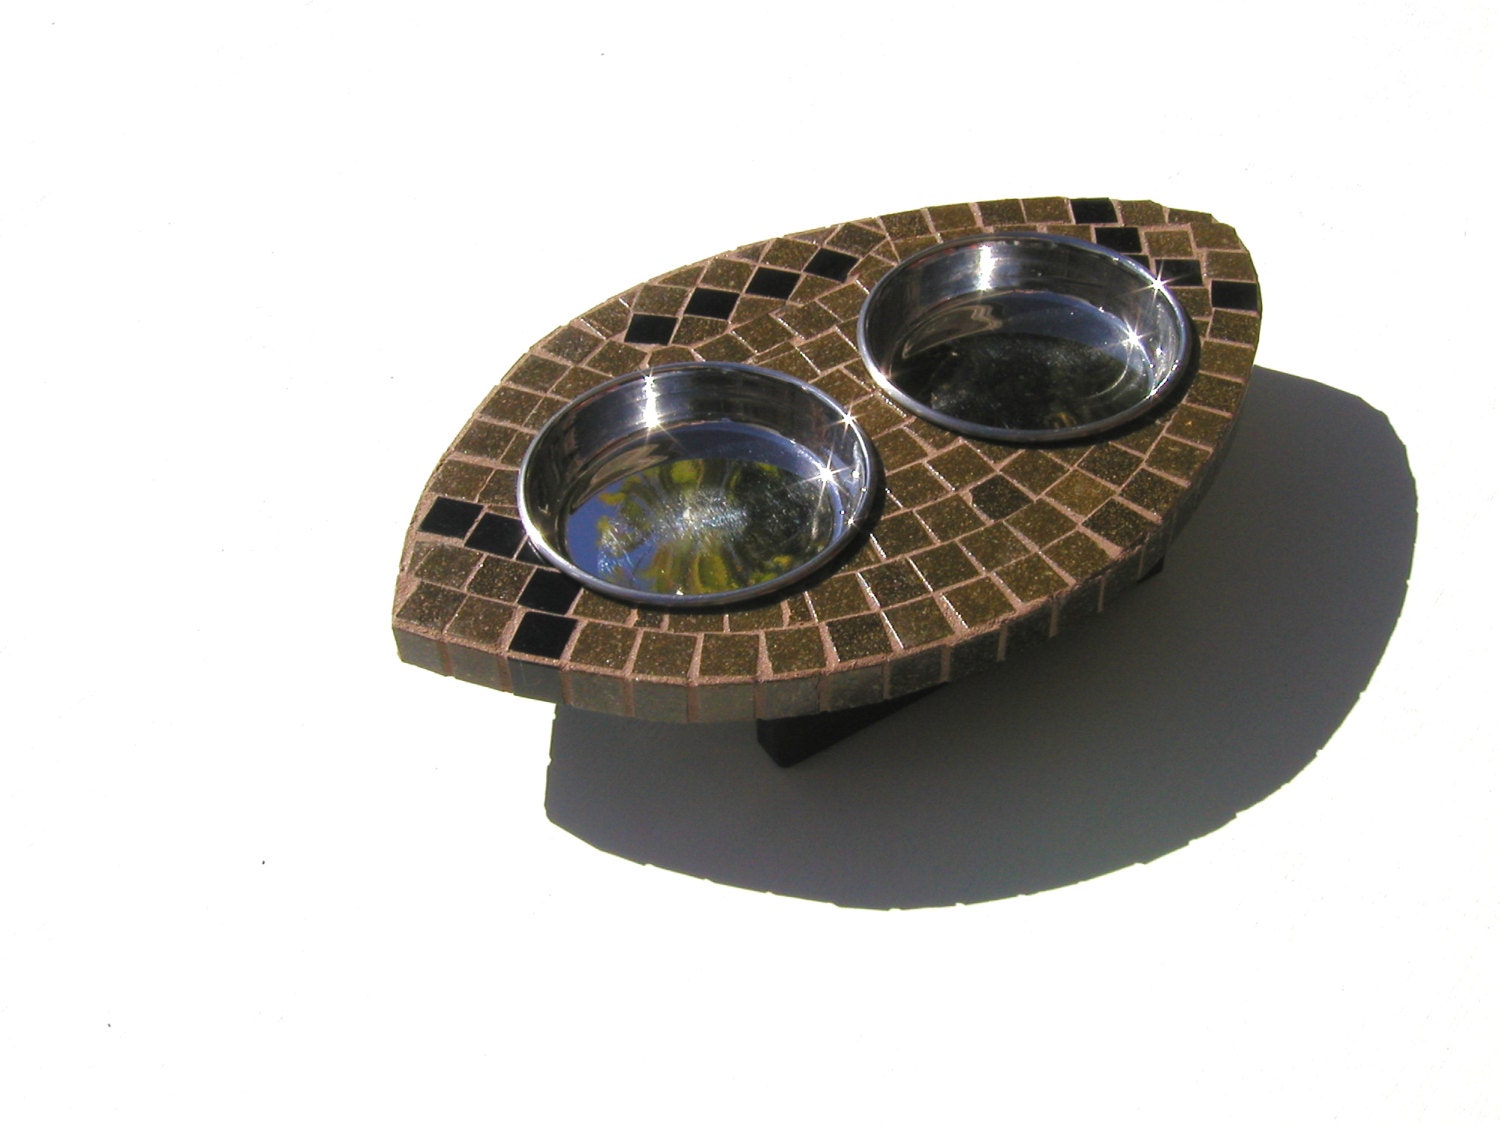 Mosaic Football Diner, football dog feeder, elevated small dog or cat station